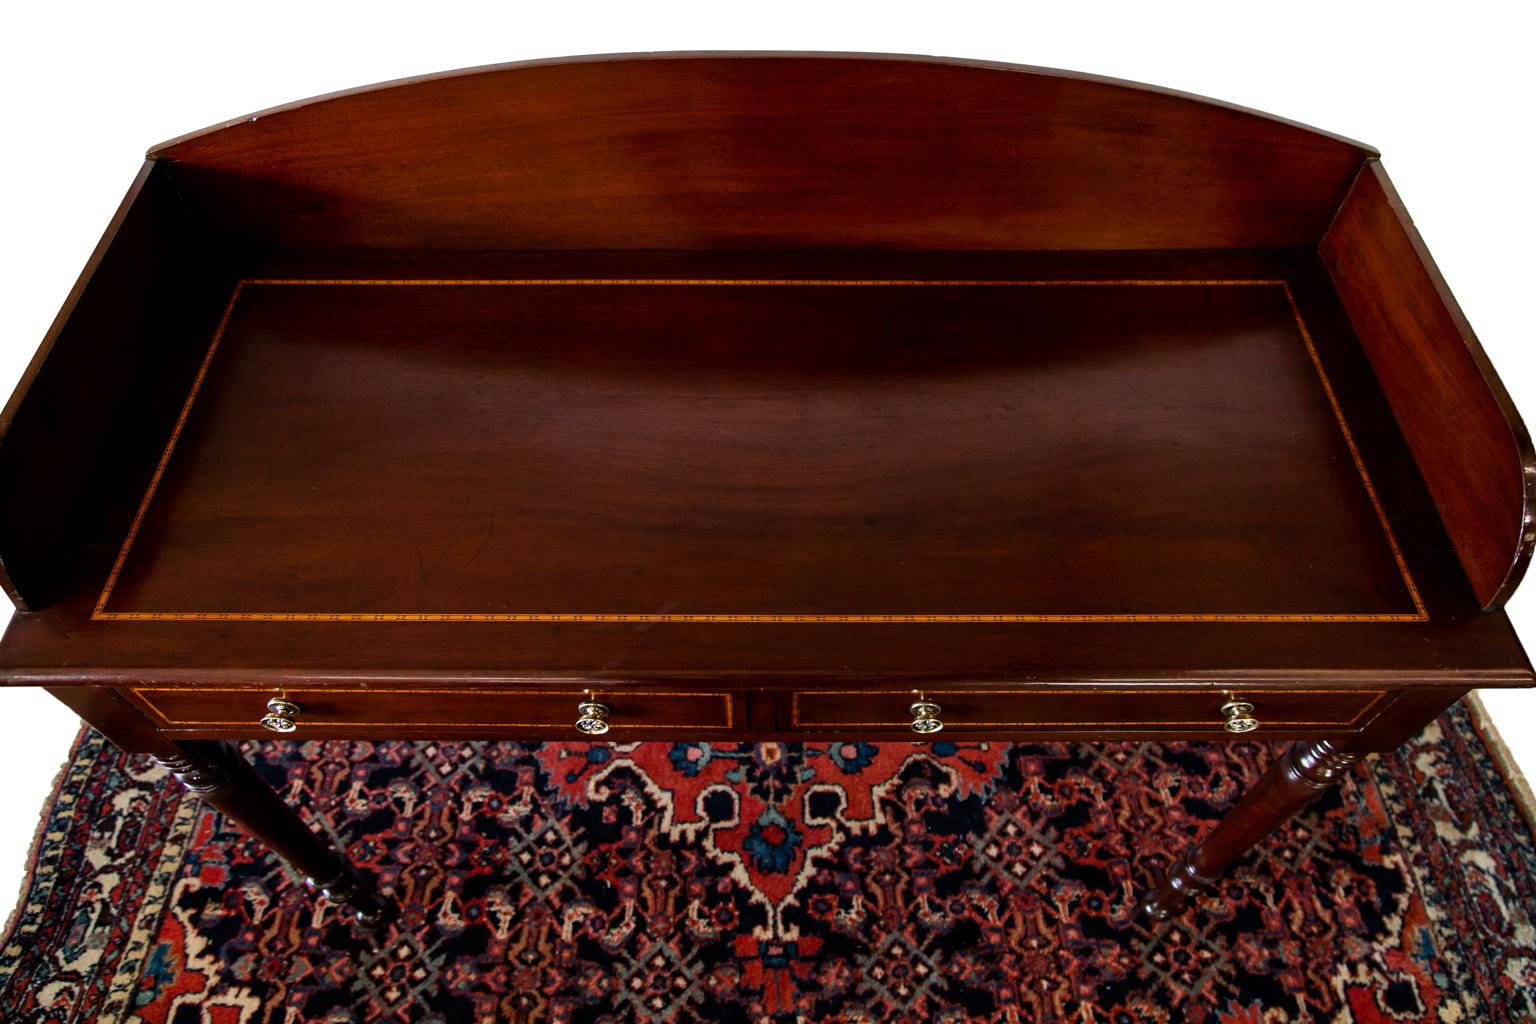 This Sheraton style server has a gallery that has an arched top and shaped sides. The top and drawer fronts are inlaid with Tonbridge style inlay. The finish and hardware are later.